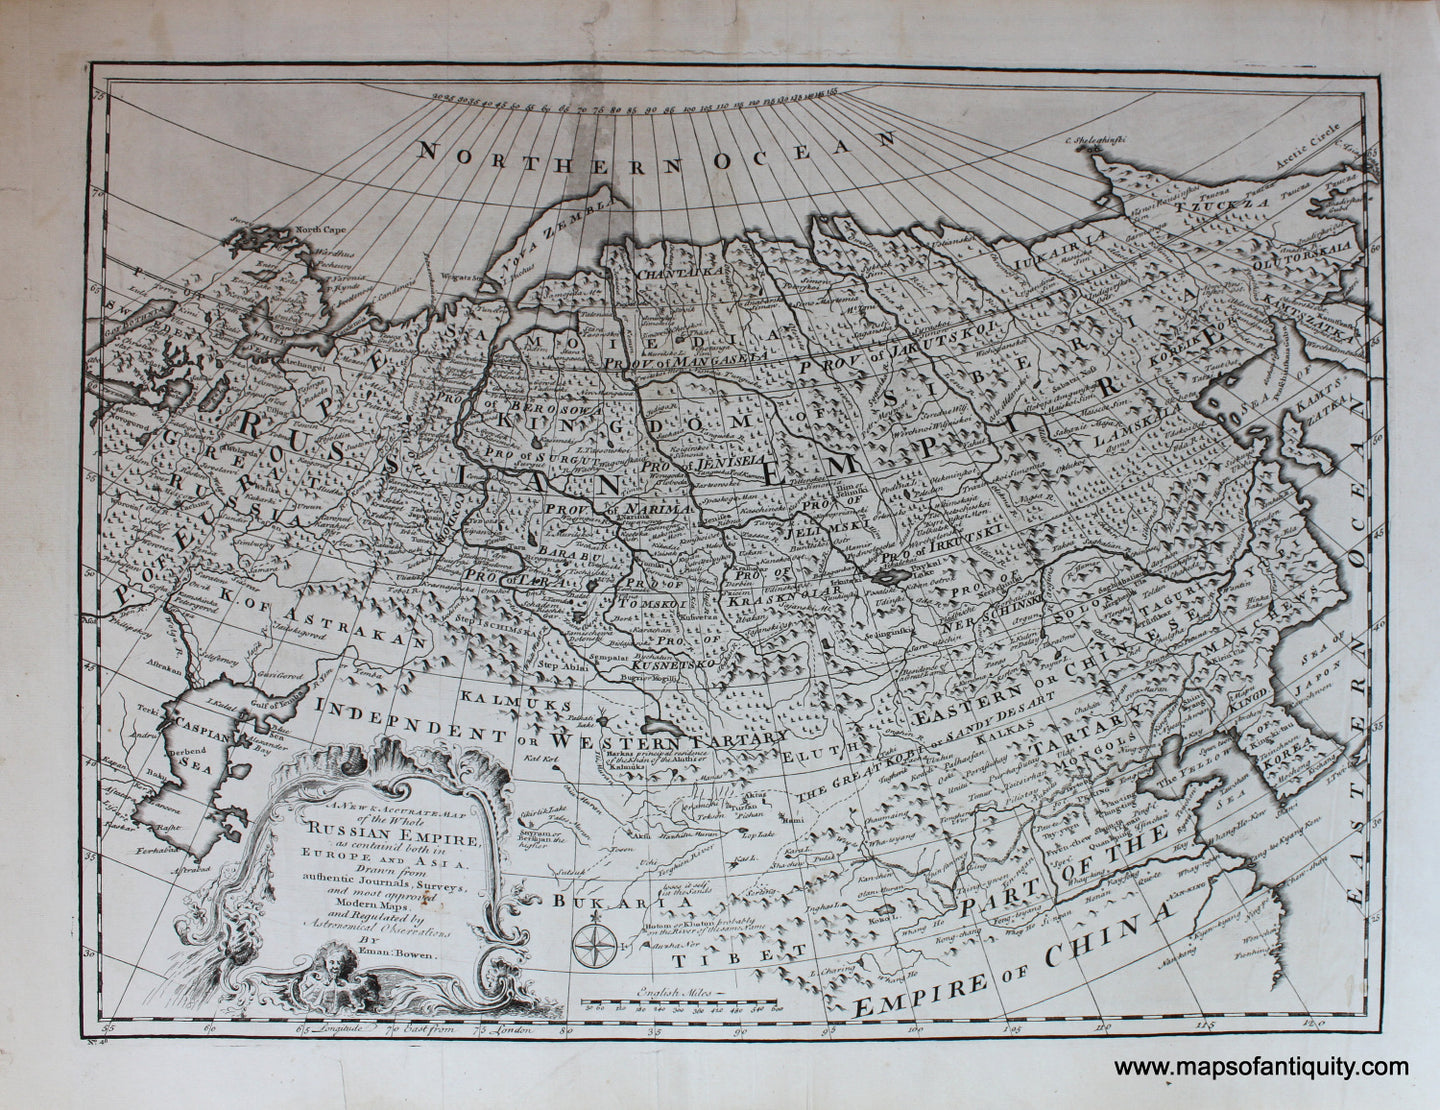 Antique-Black-and-White-Map-A-New-and-Accurate-Map-of-the-Whole-Russian-Empire-as-contained-both-in-Europe-and-Asia-Asia-Russia-c.-1747-Bowen-Maps-Of-Antiquity